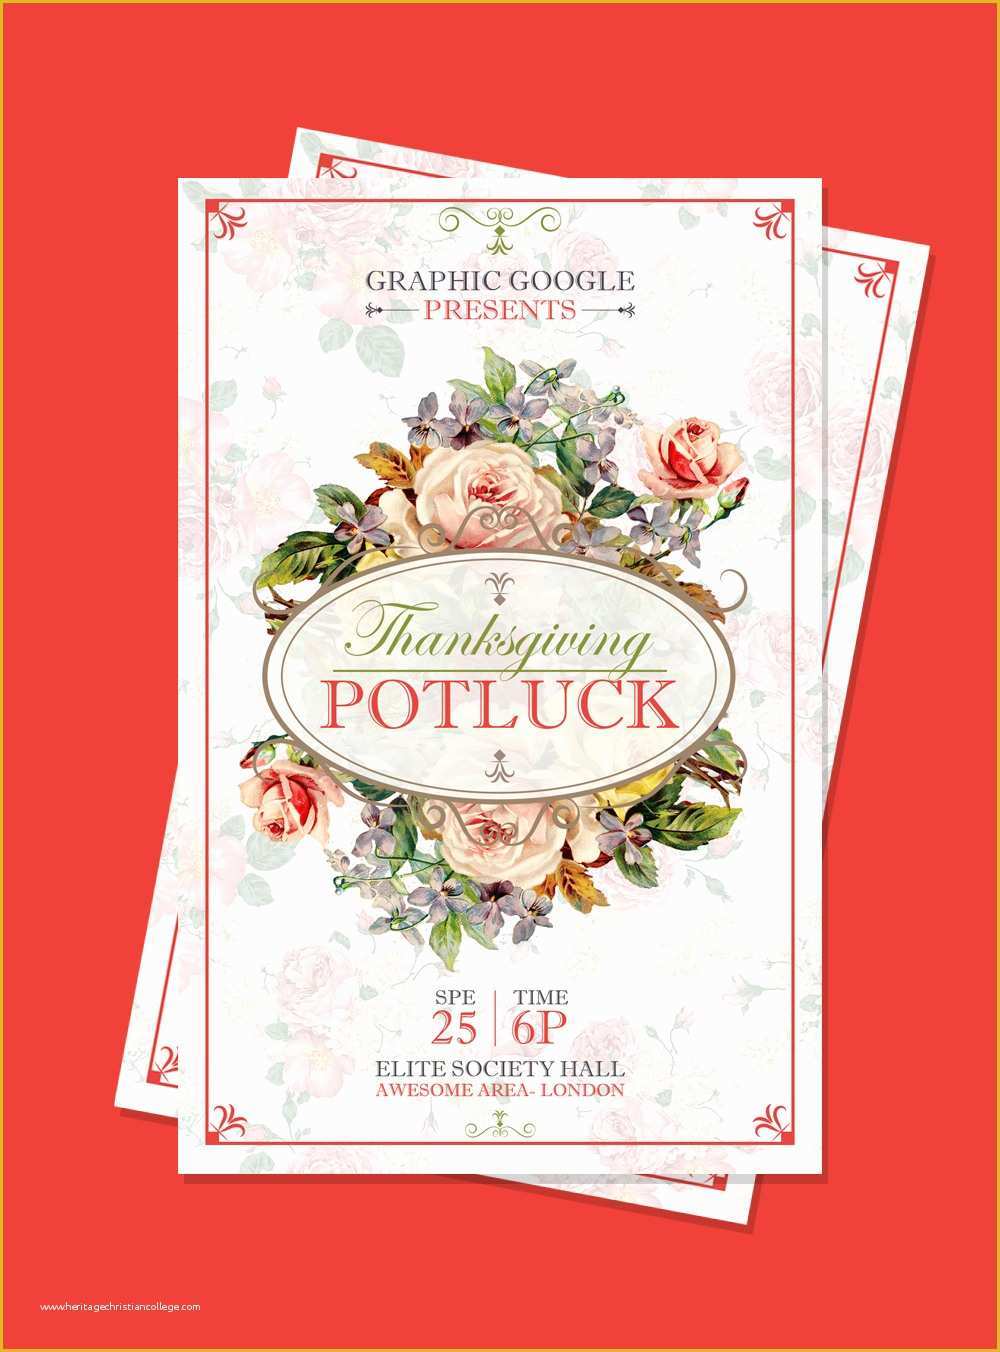 Potluck Flyer Template Free Of Free Potluck Thanksgiving Flyer Template Design Psdgraphic